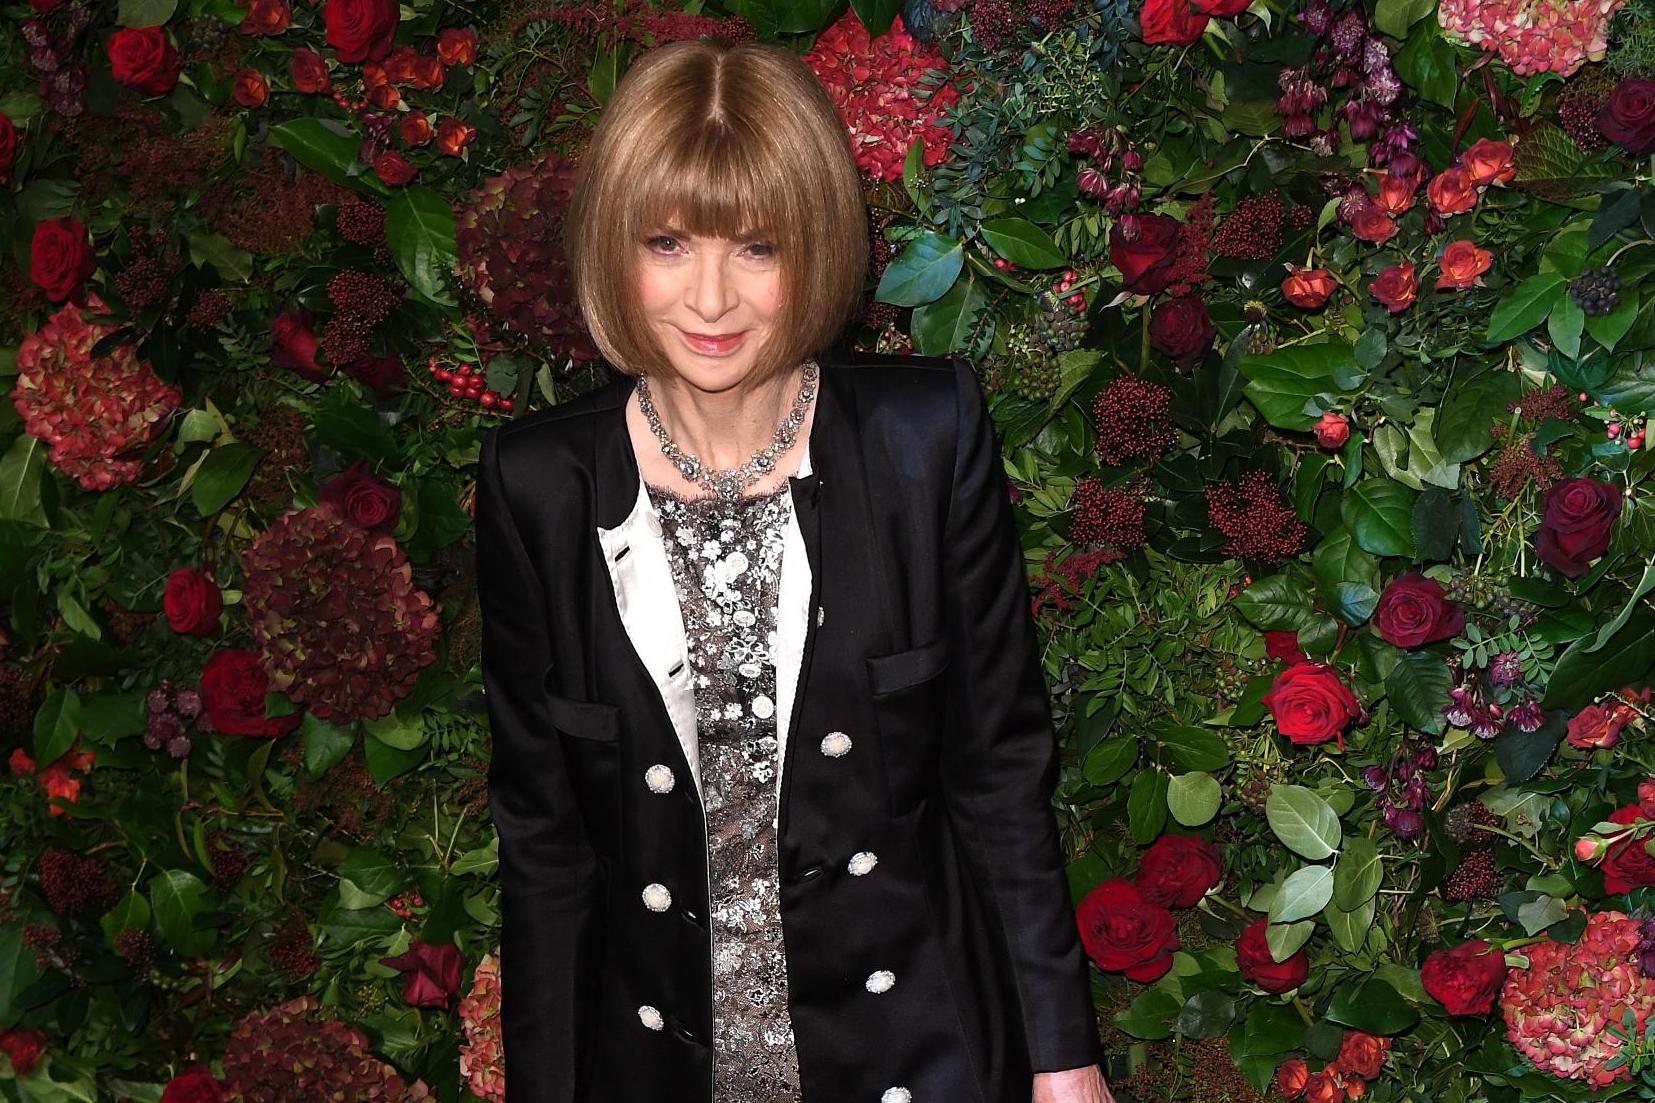 Anna Wintour on 24 November 2019 in London.